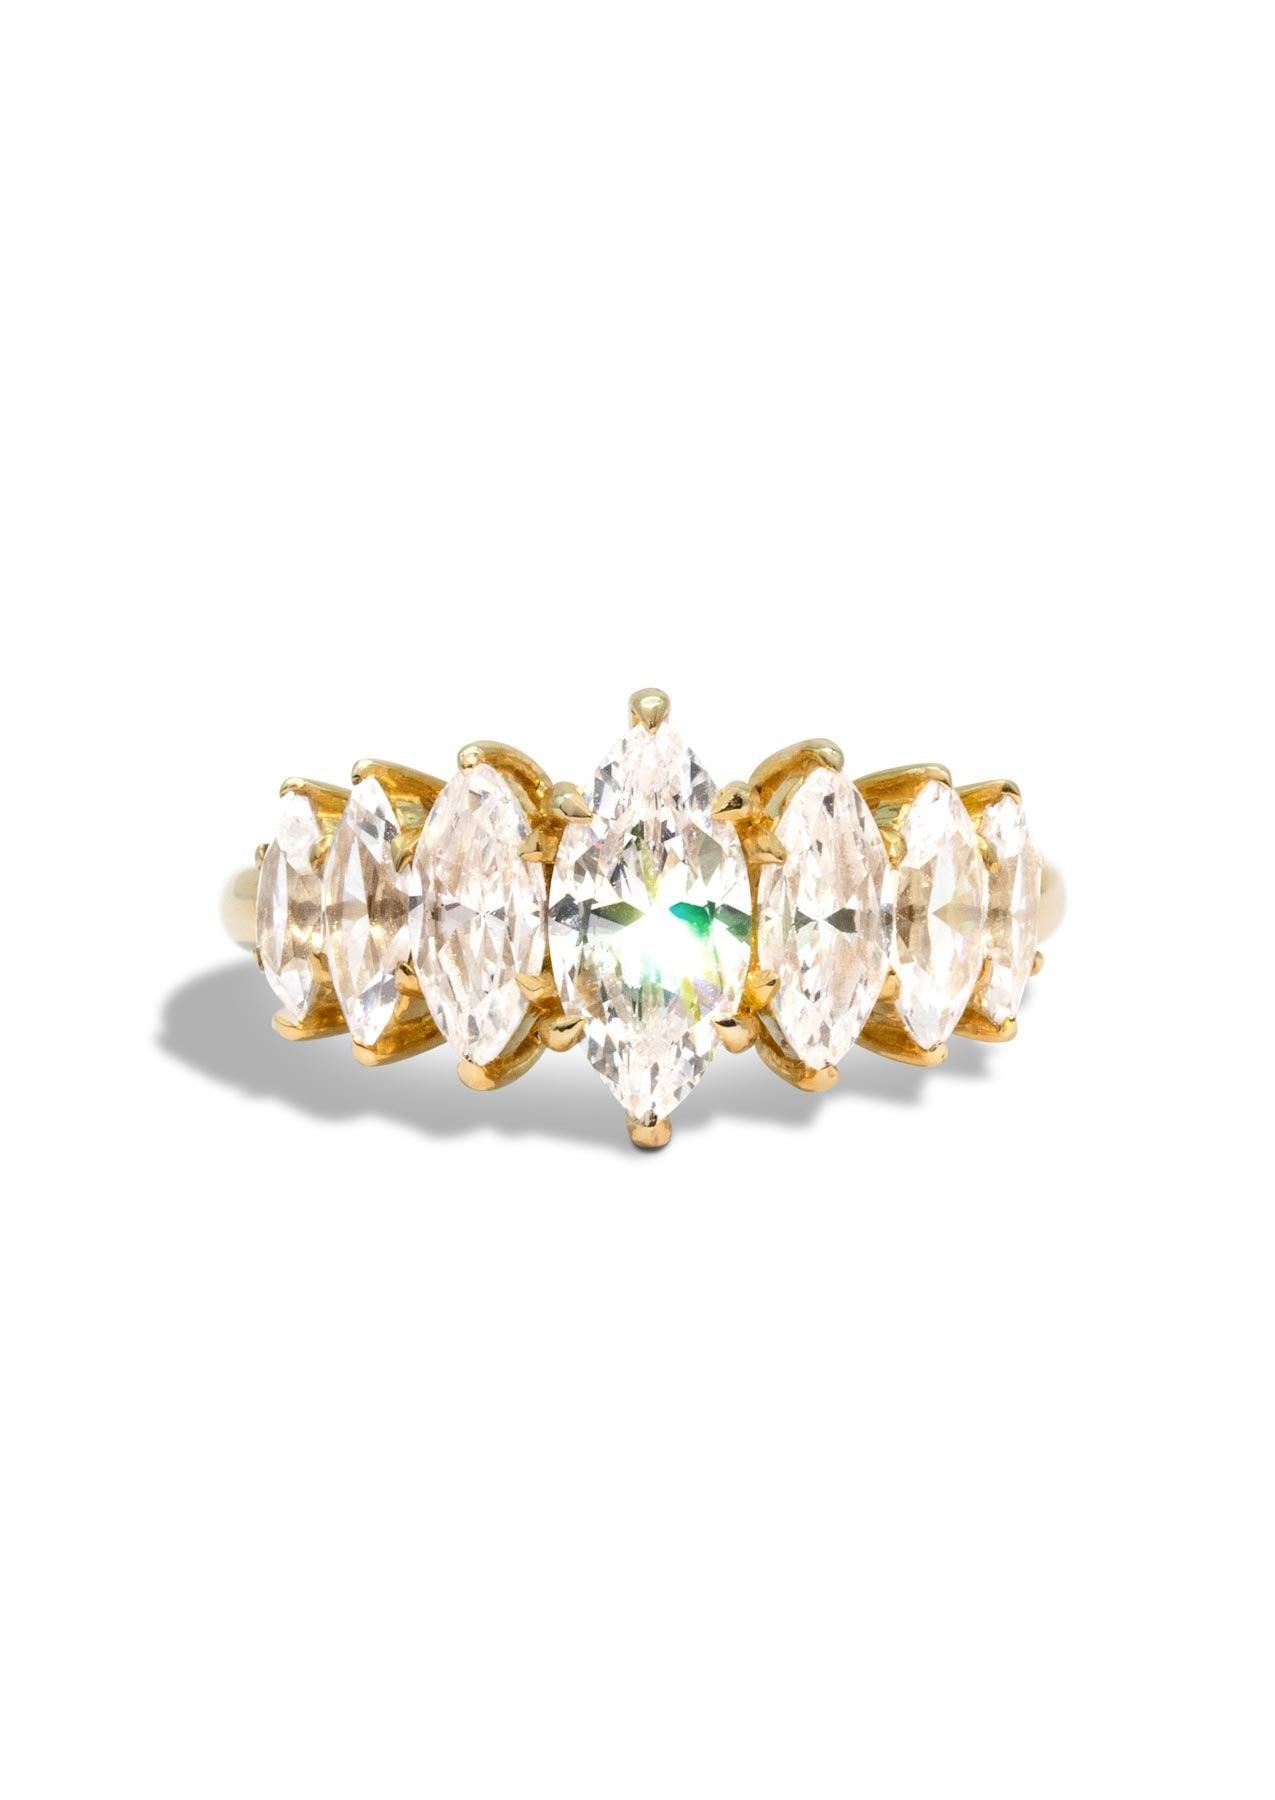 The Marquise Banks Yellow Gold Cultured Diamond Ring